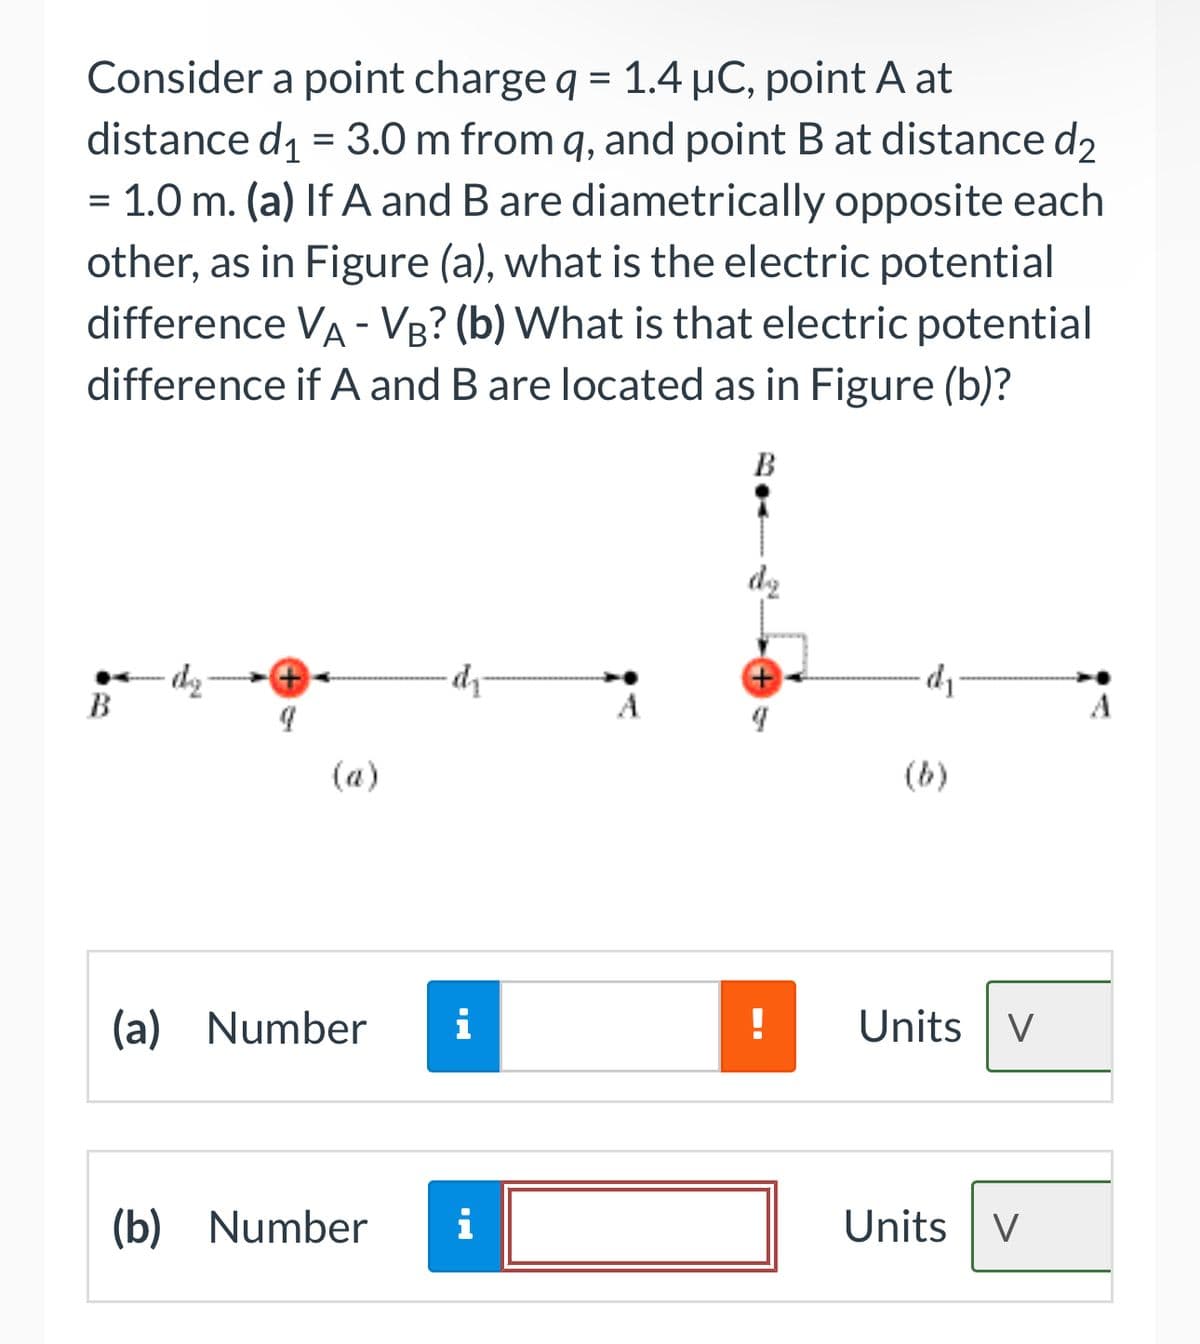 Consider a point charge q = 1.4 µC, point A at
distance d₁ = 3.0 m from q, and point B at distance d₂
1.0 m. (a) If A and B are diametrically opposite each
other, as in Figure (a), what is the electric potential
difference VÀ - VB? (b) What is that electric potential
difference if A and B are located as in Figure (b)?
=
B
(a) Number
∙dy
(b) Number i
B
d₁
Units V
Units V